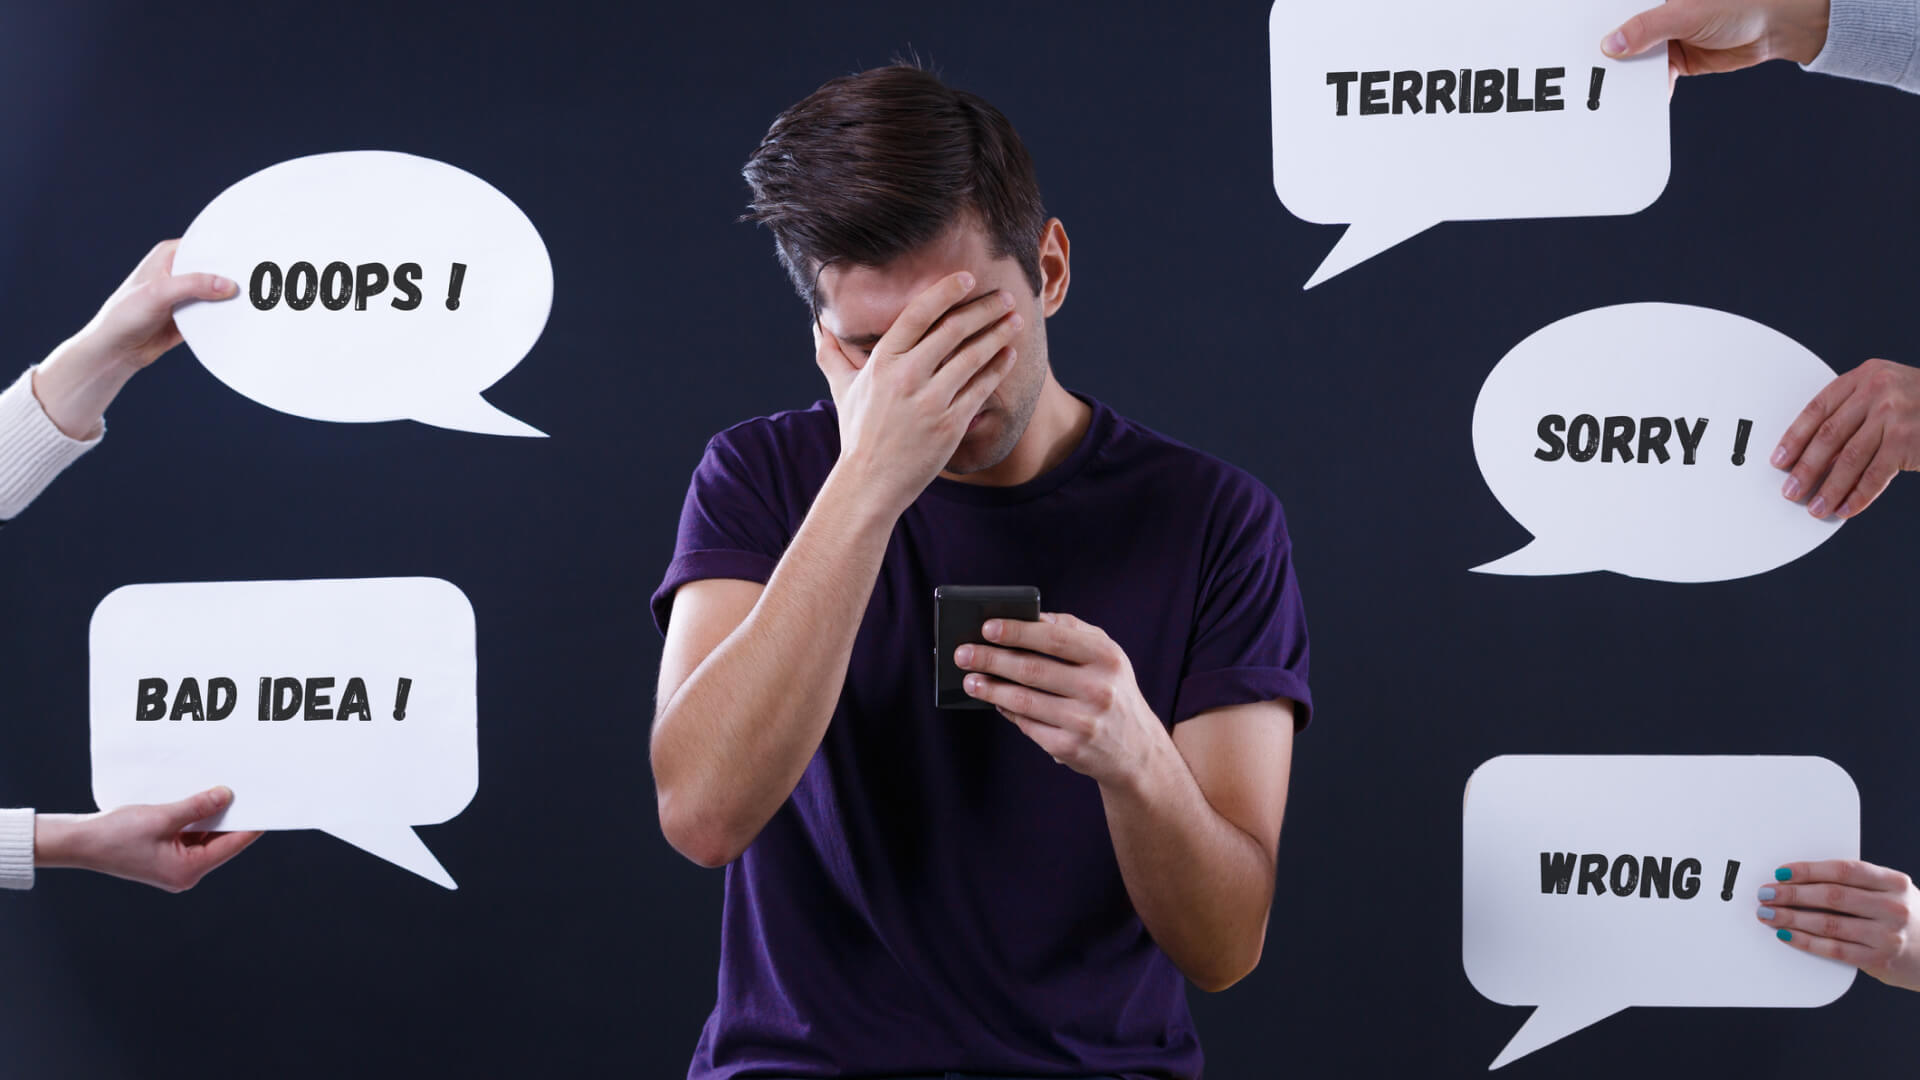 A distressed man with a phone is surrounded by speech bubbles indicating mistakes and apologies.